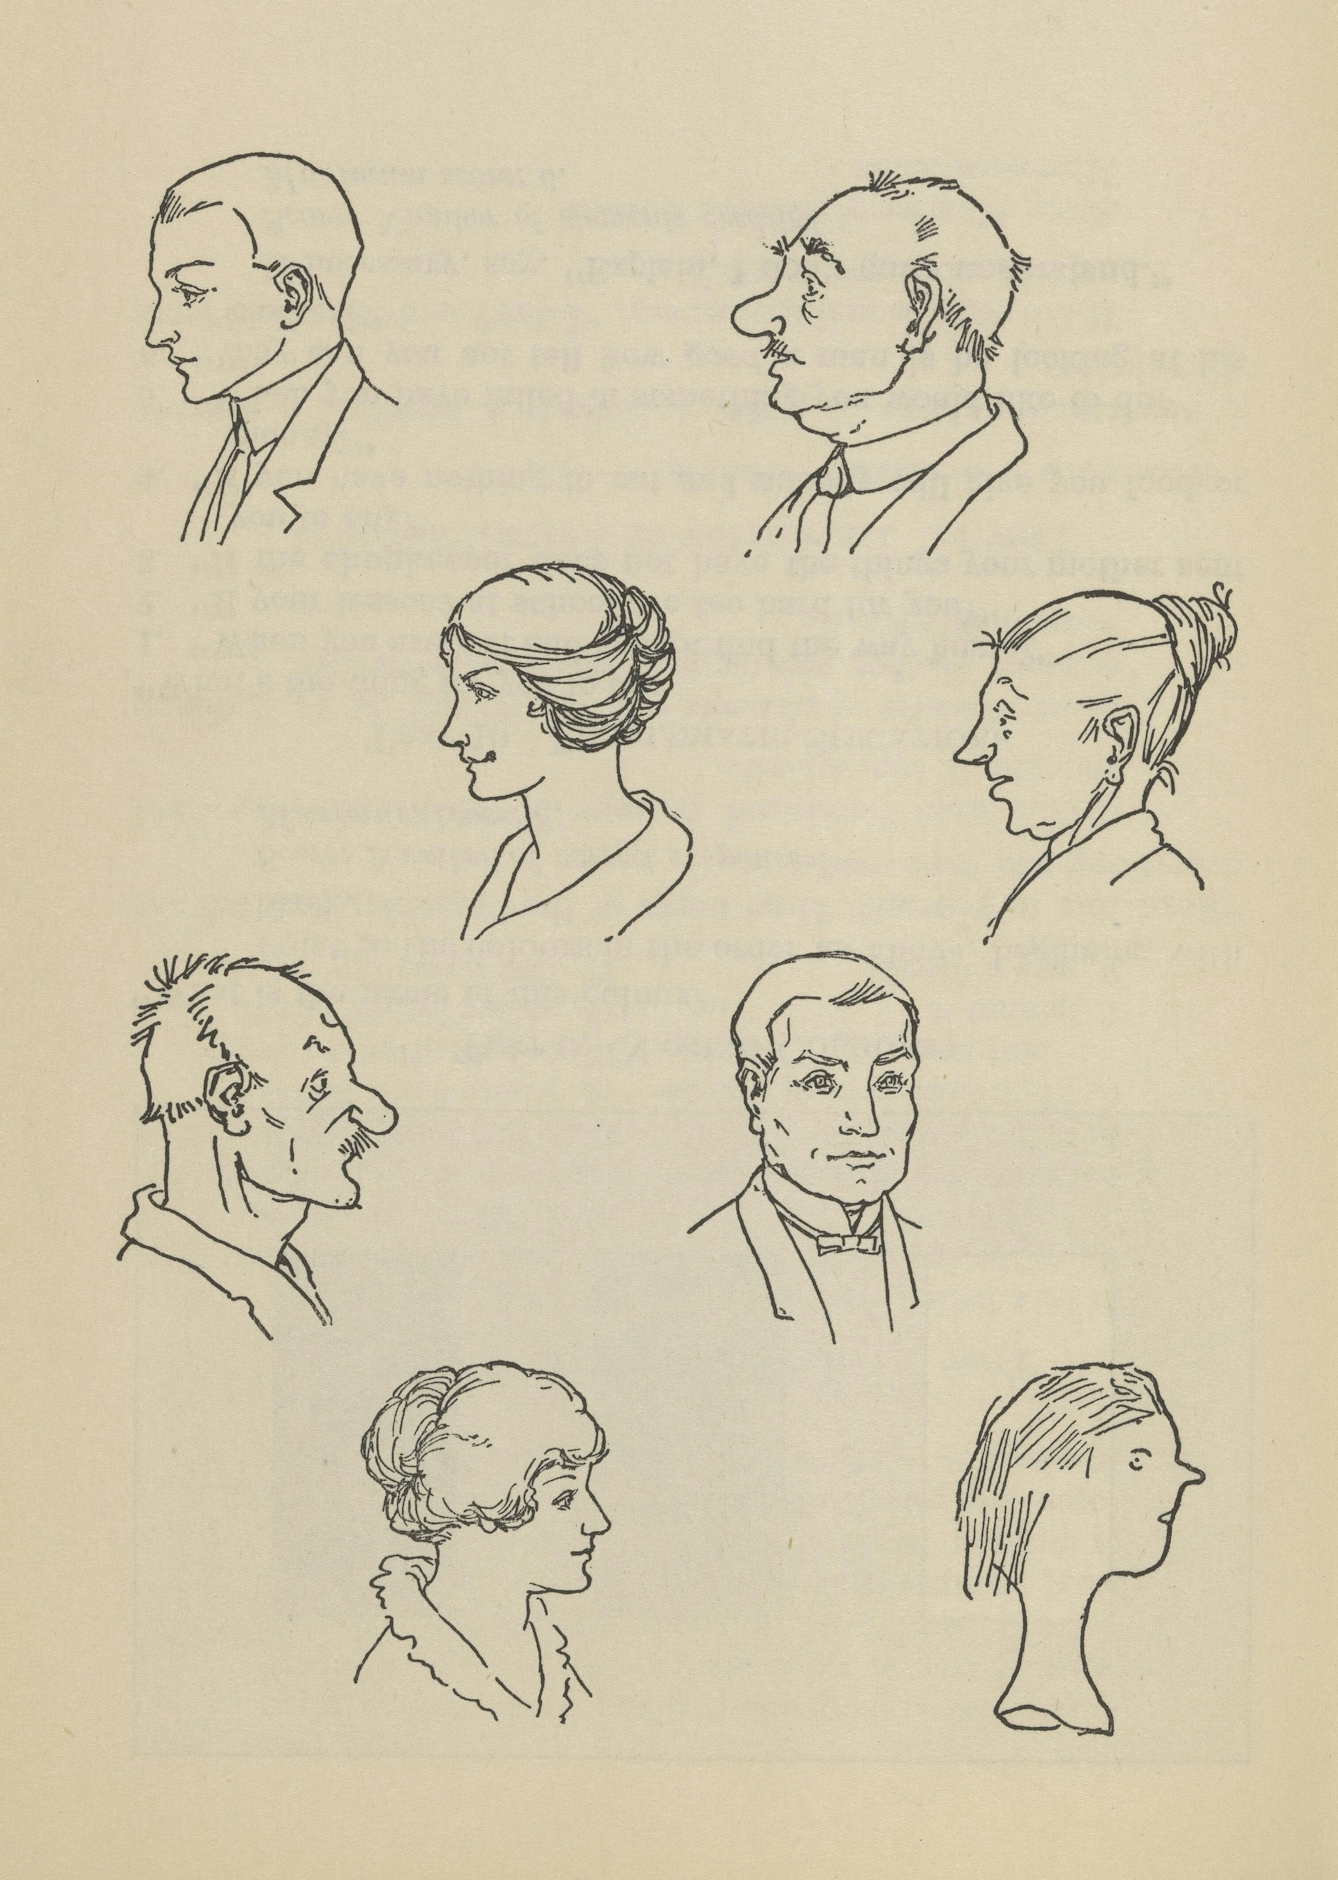 Black and white line drawing showing several people’s faces in profile.